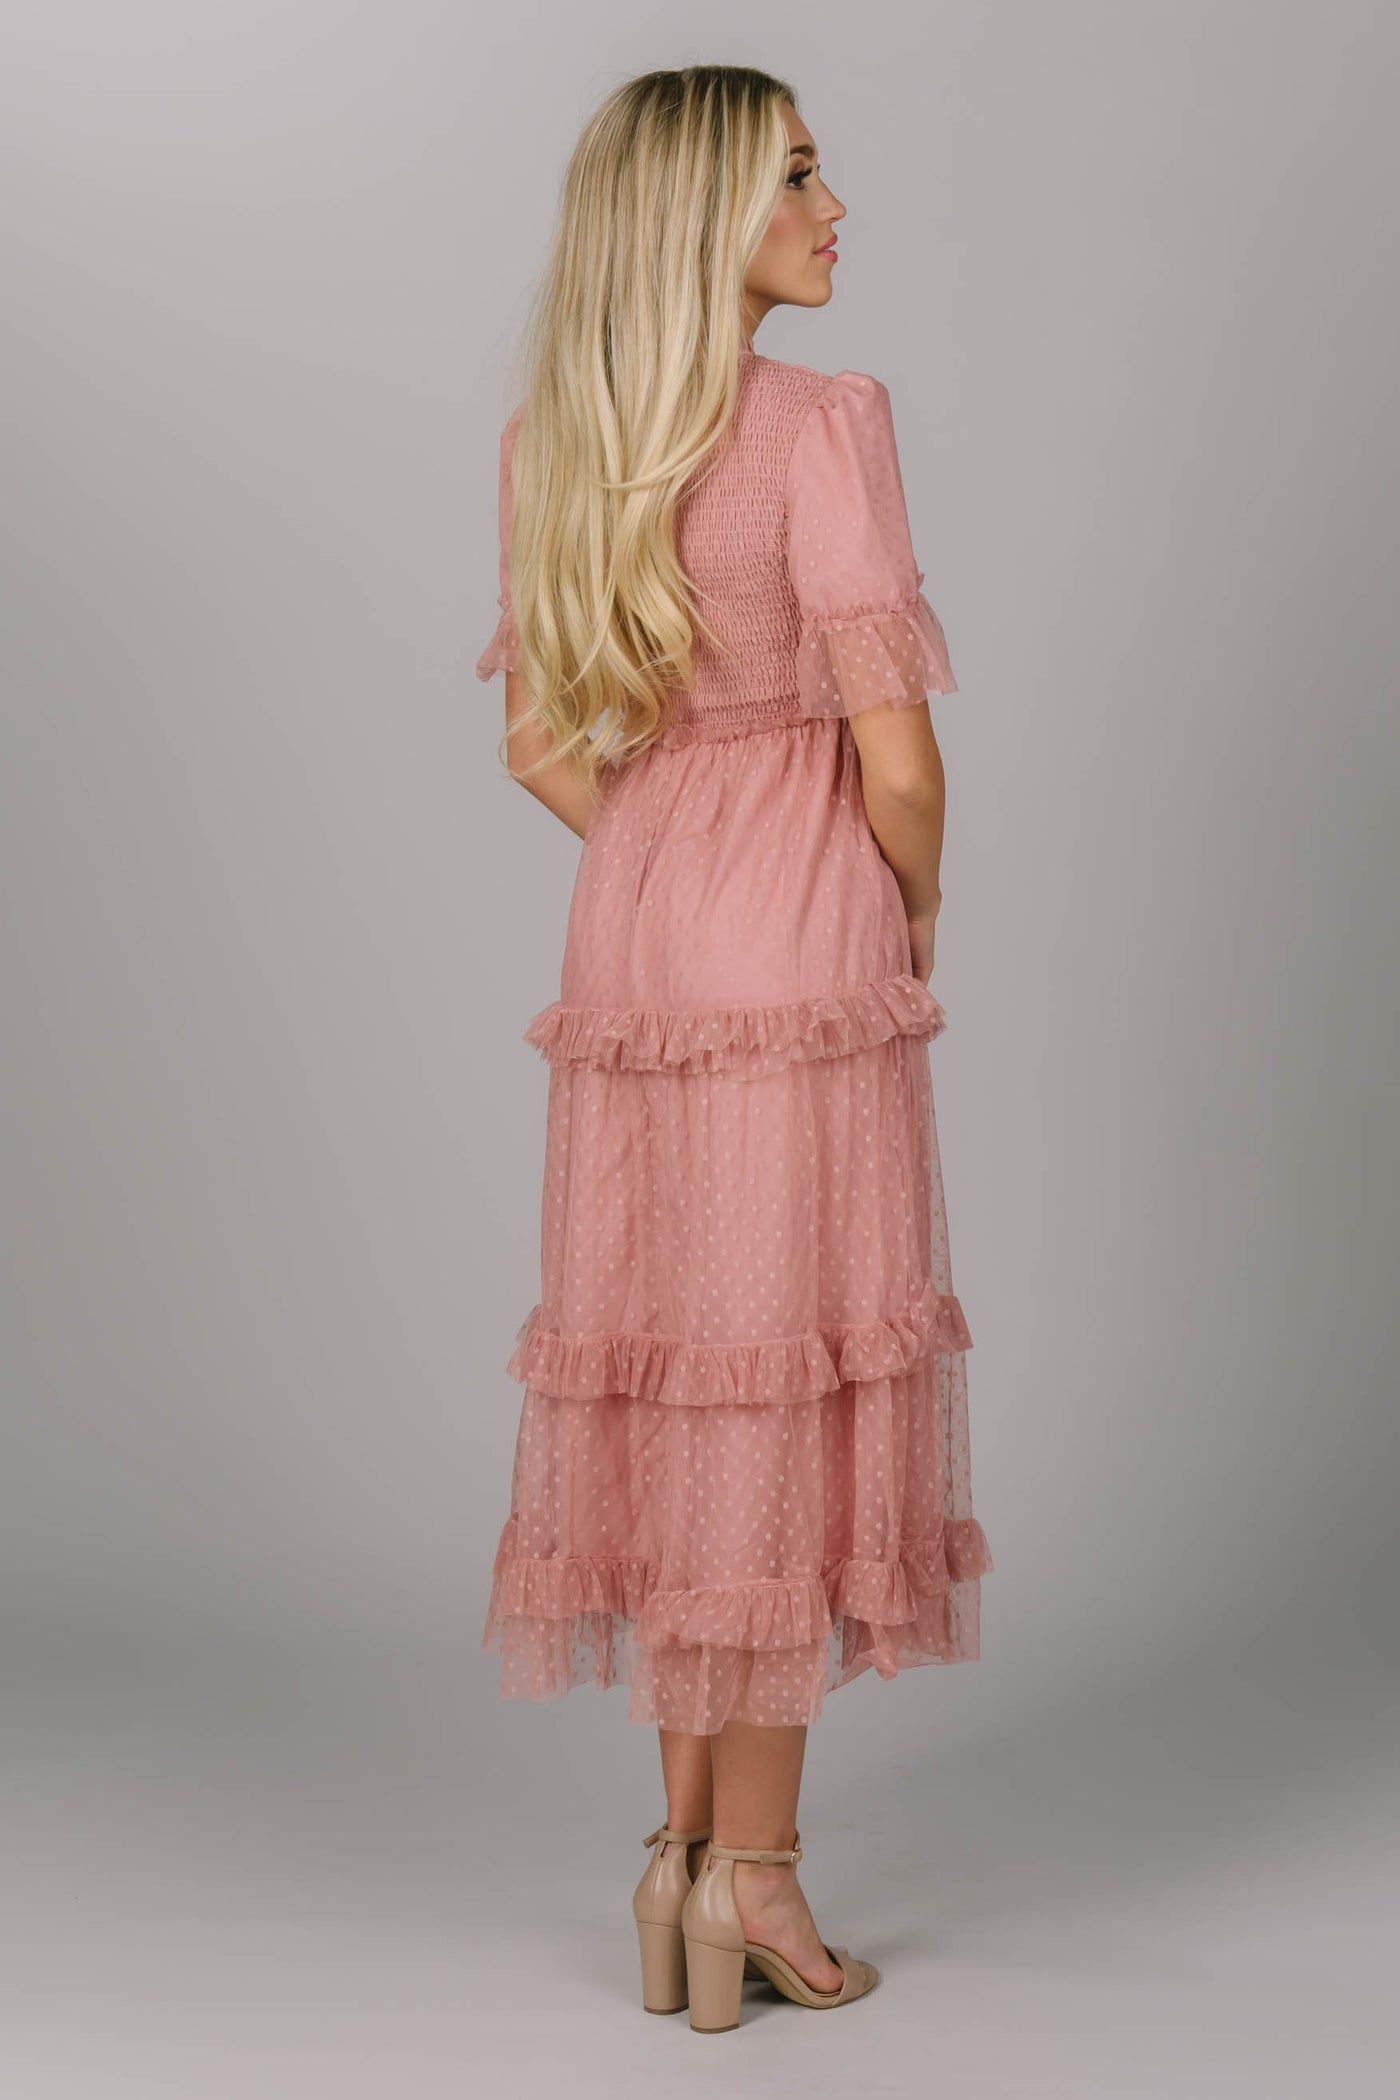 Back view of blush modest dress. It has ruffled tiering on the sleeves and skirt. This midi-length dress has a higher neckline and slightly puffed sleeves. The Pyper dress could make a fun modest bridesmaid dress.